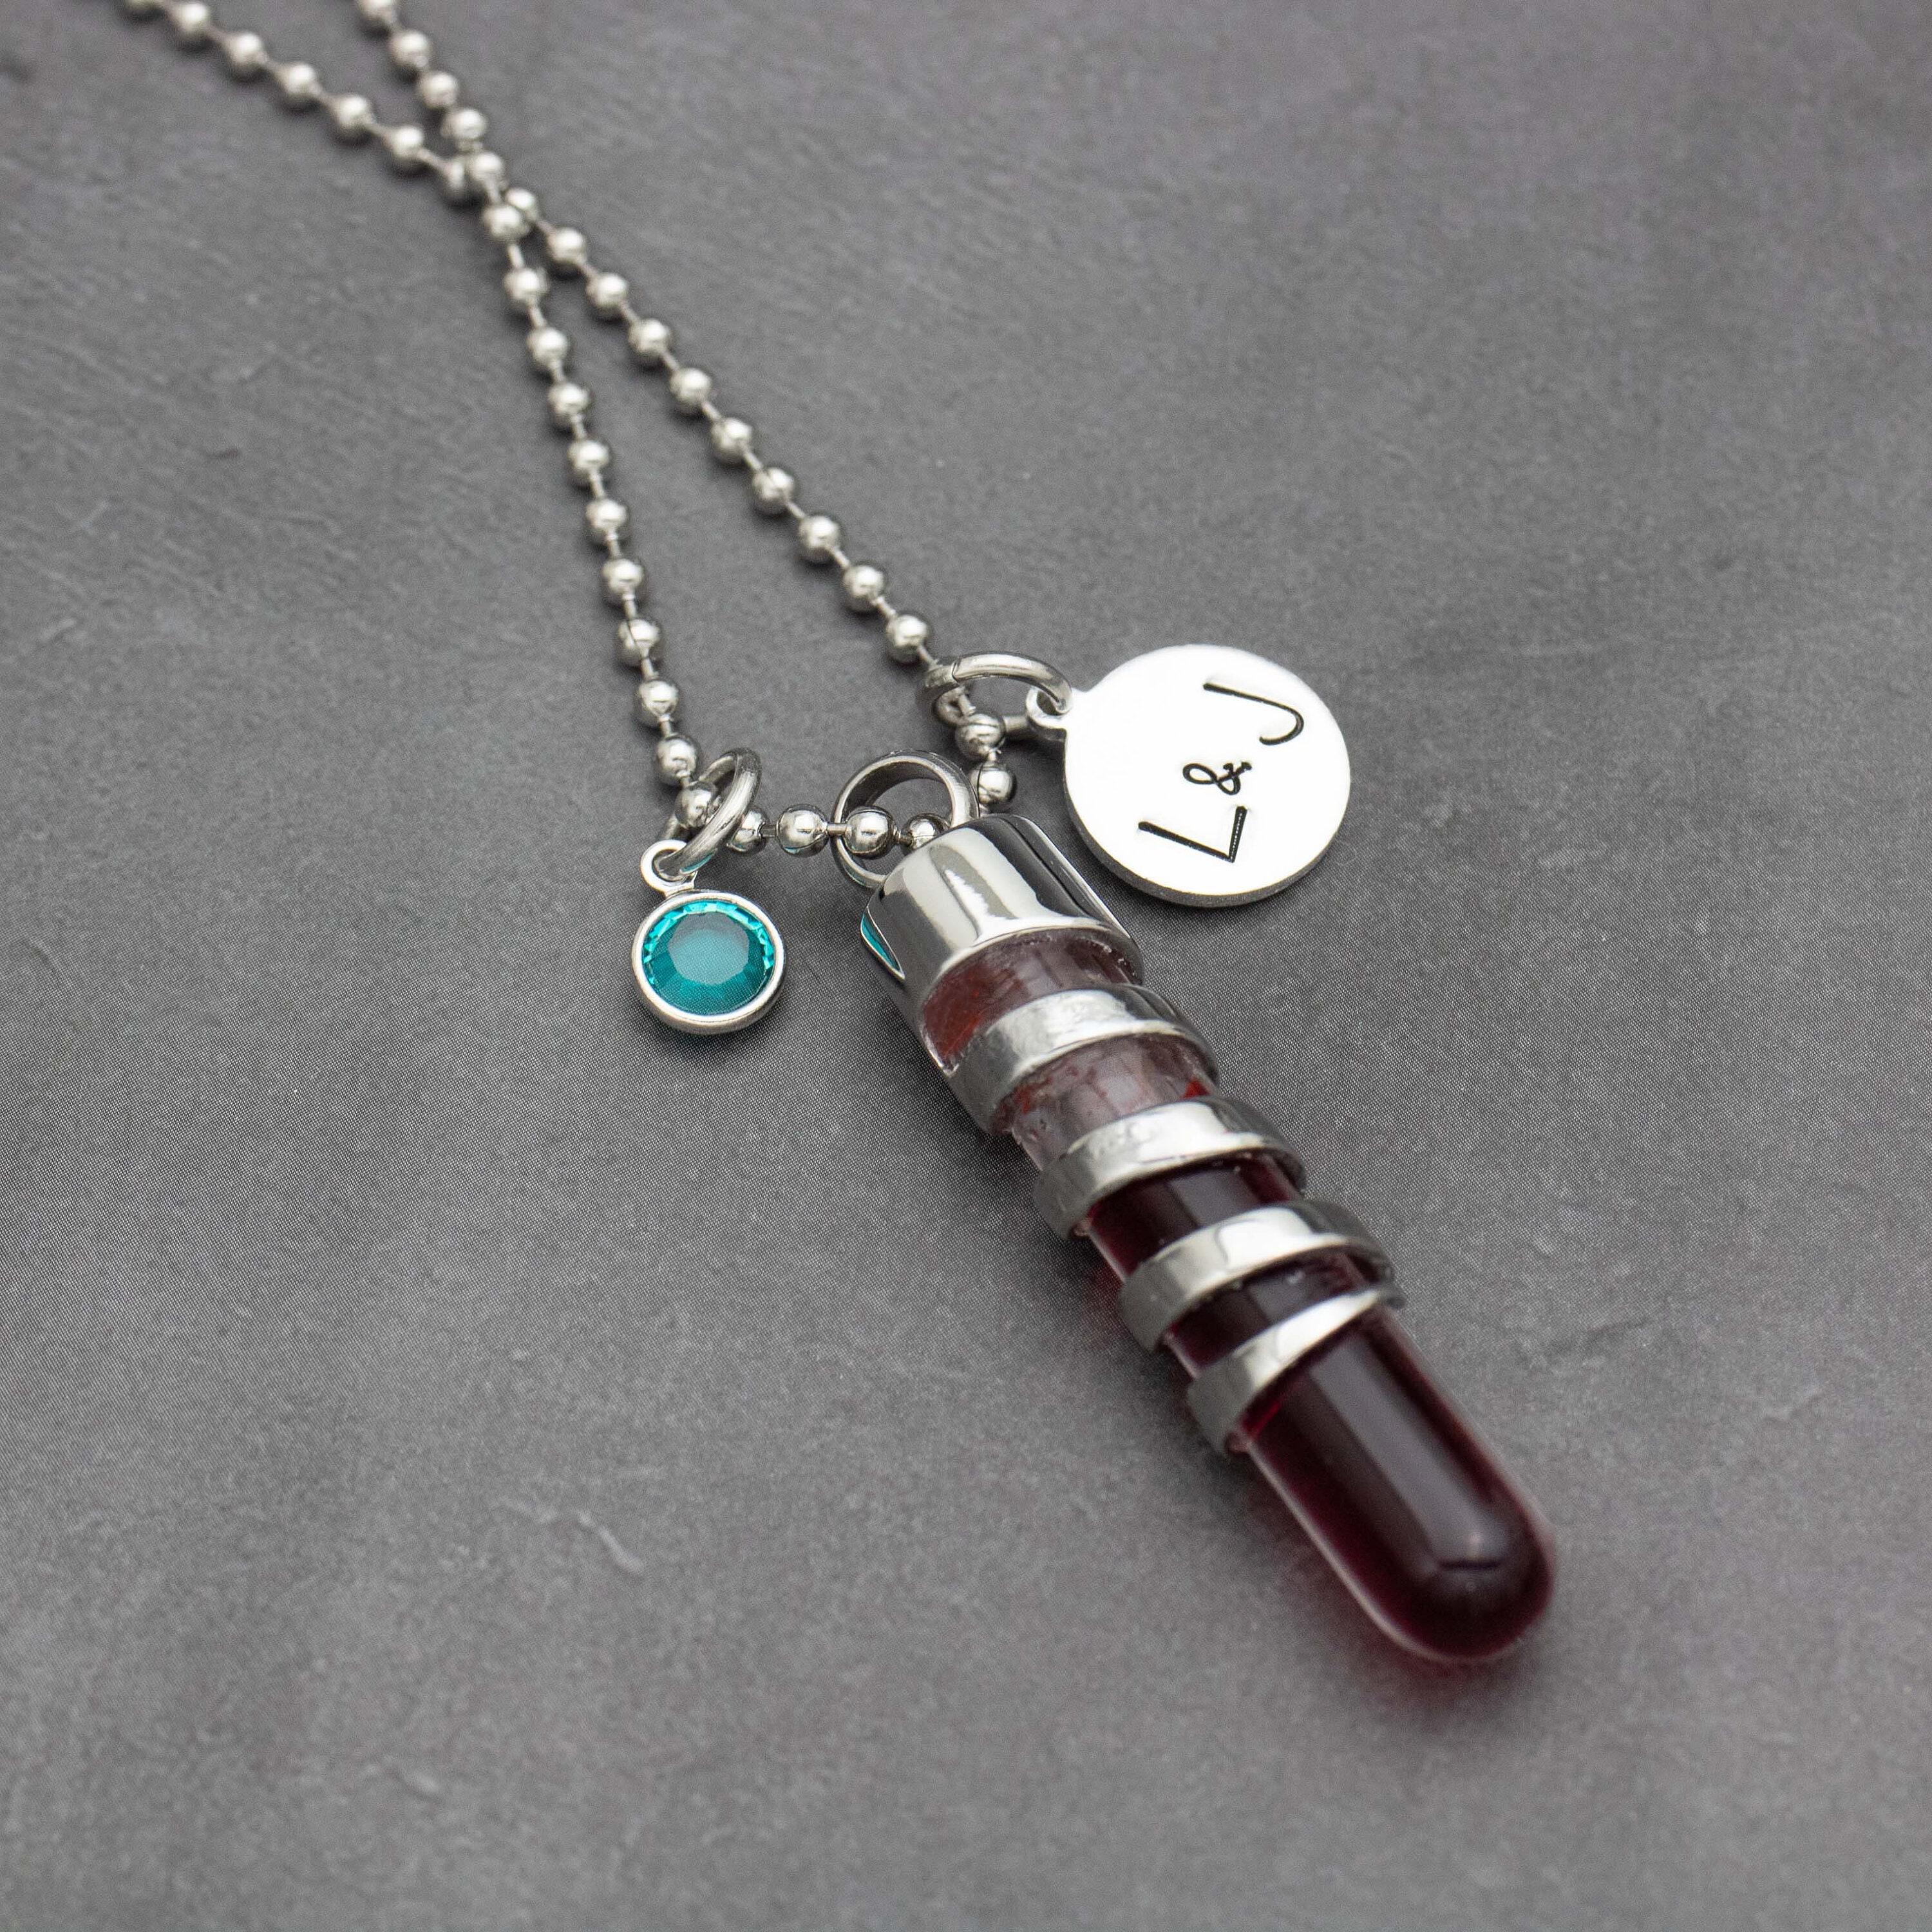 Stainless Steel Beaded Heart Necklace With Chain Make A Wish Blood Vial  Necklace For Women Clear Vial Bottle Jewelry Drop Delivery From Dayupshop,  $10.09 | DHgate.Com